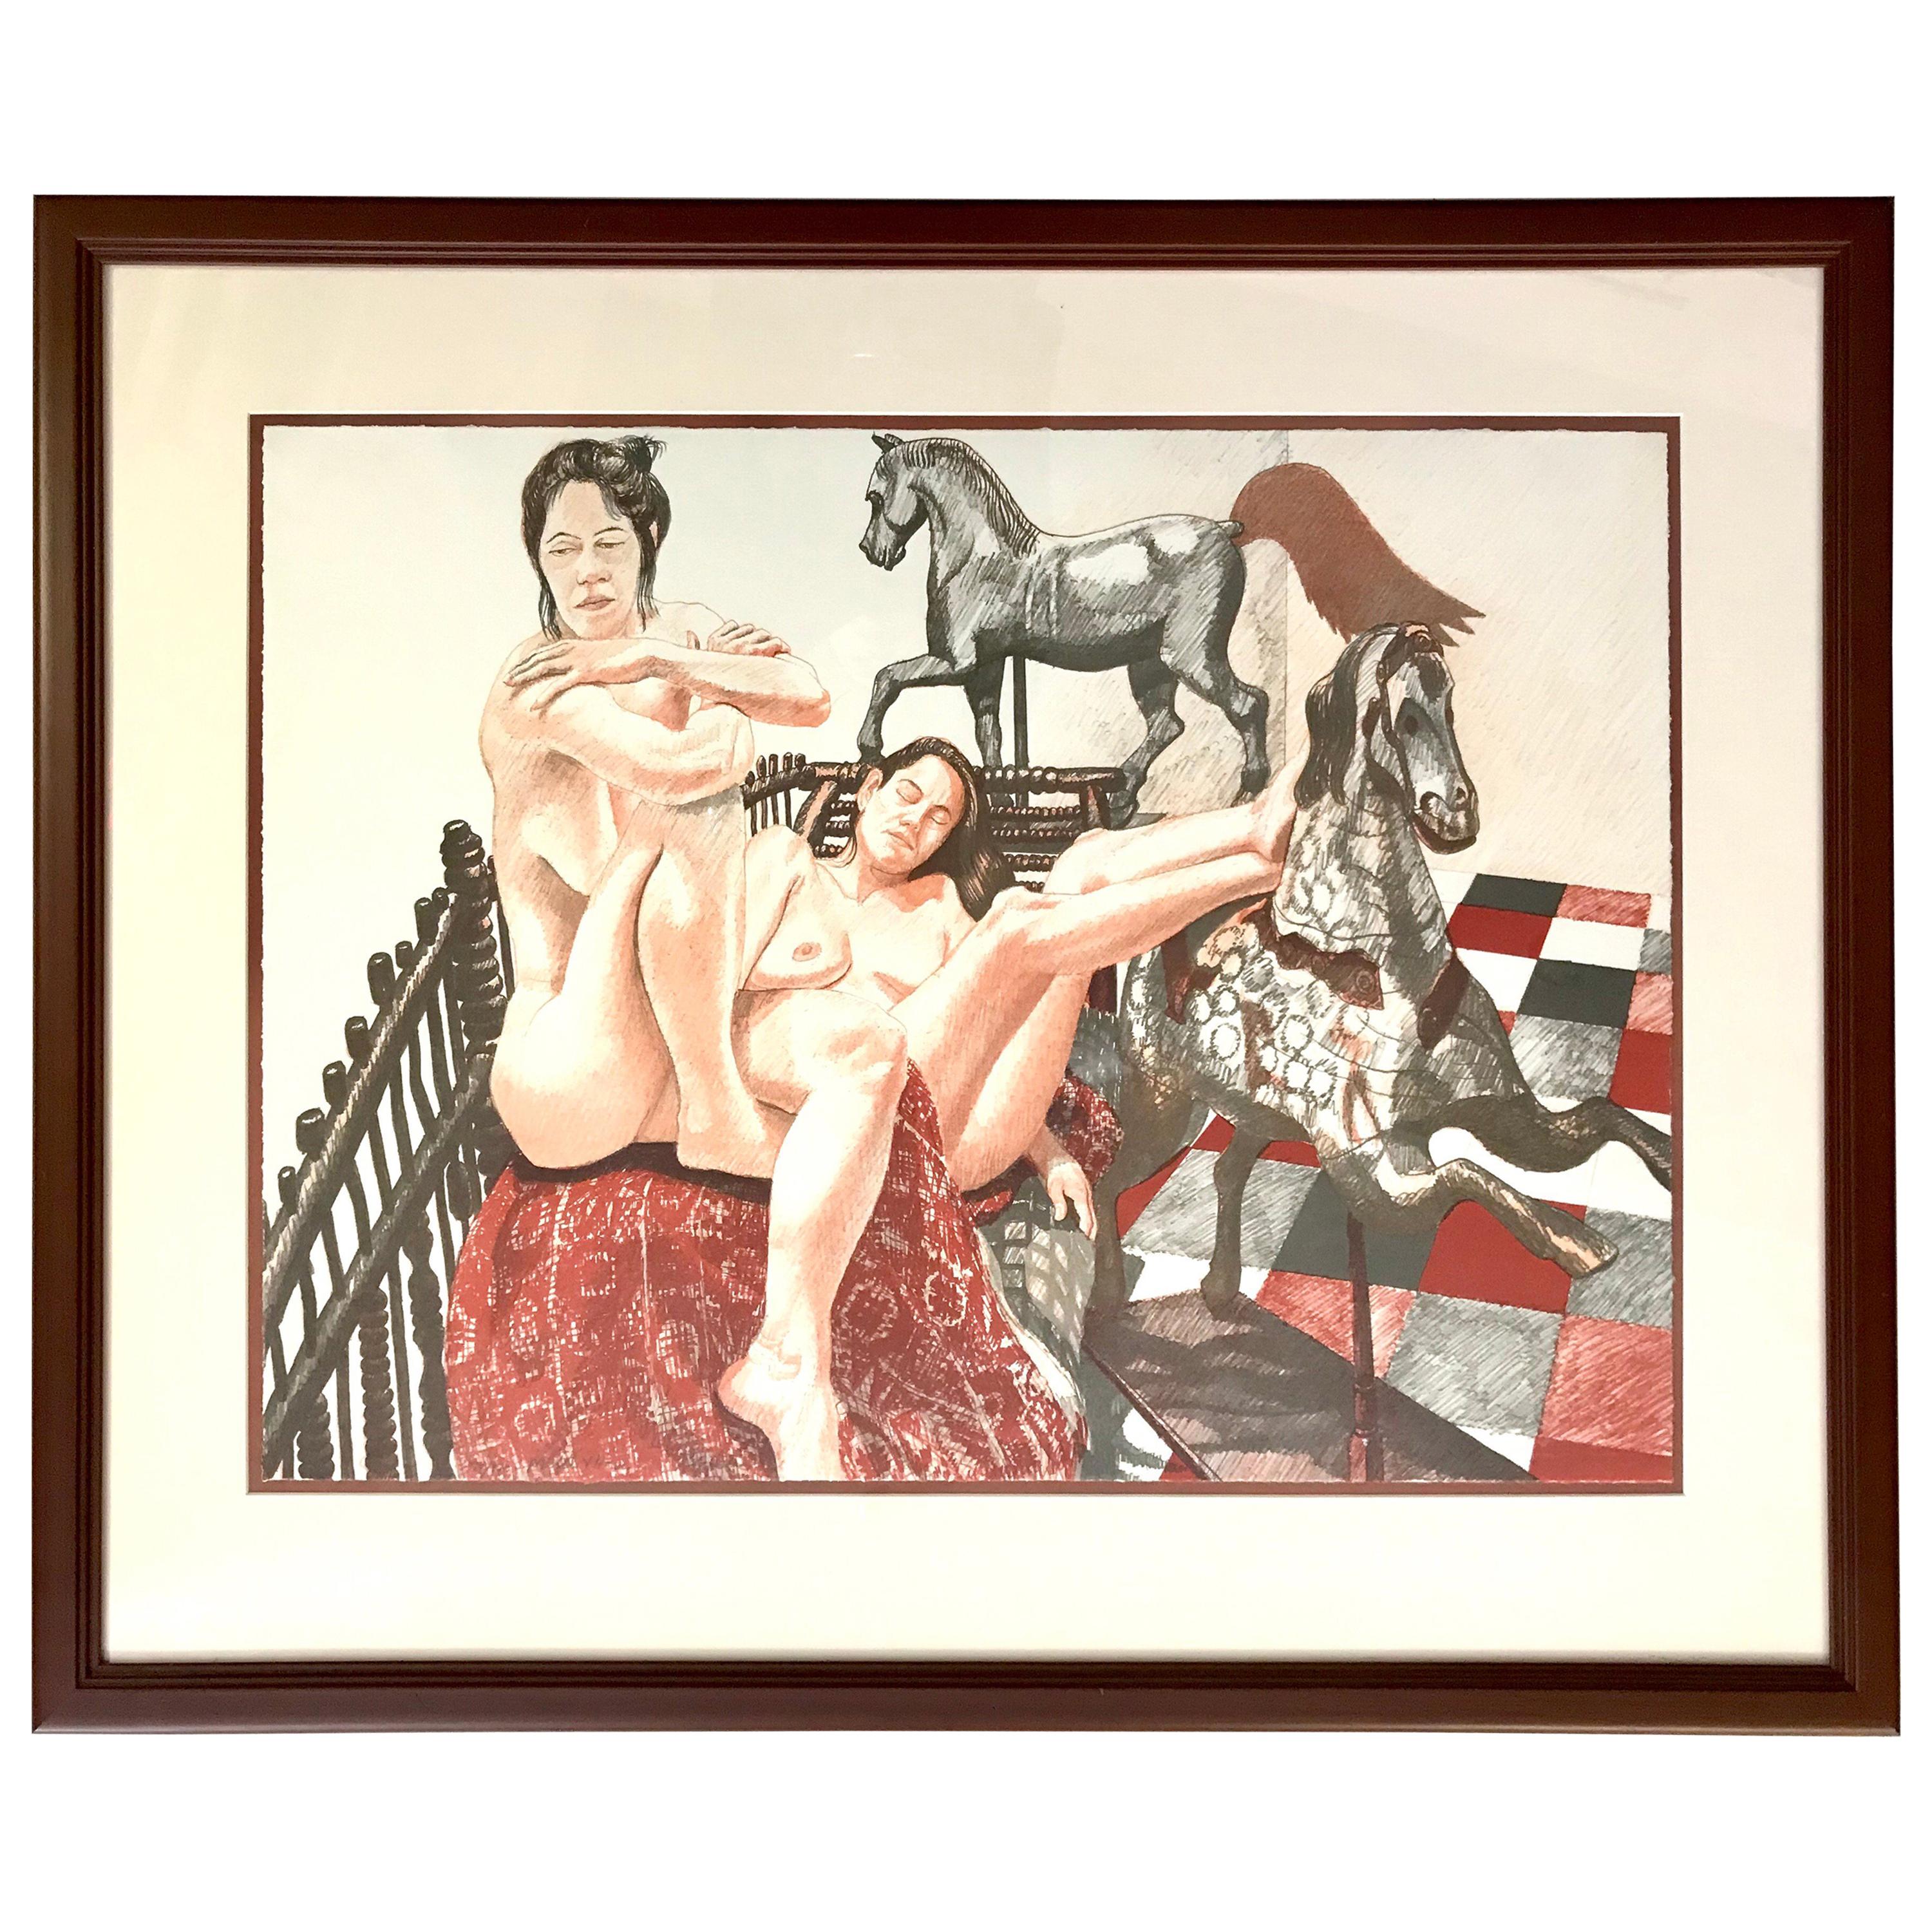 Philip Pearlstein “Models and Horses” Signed Lithograph